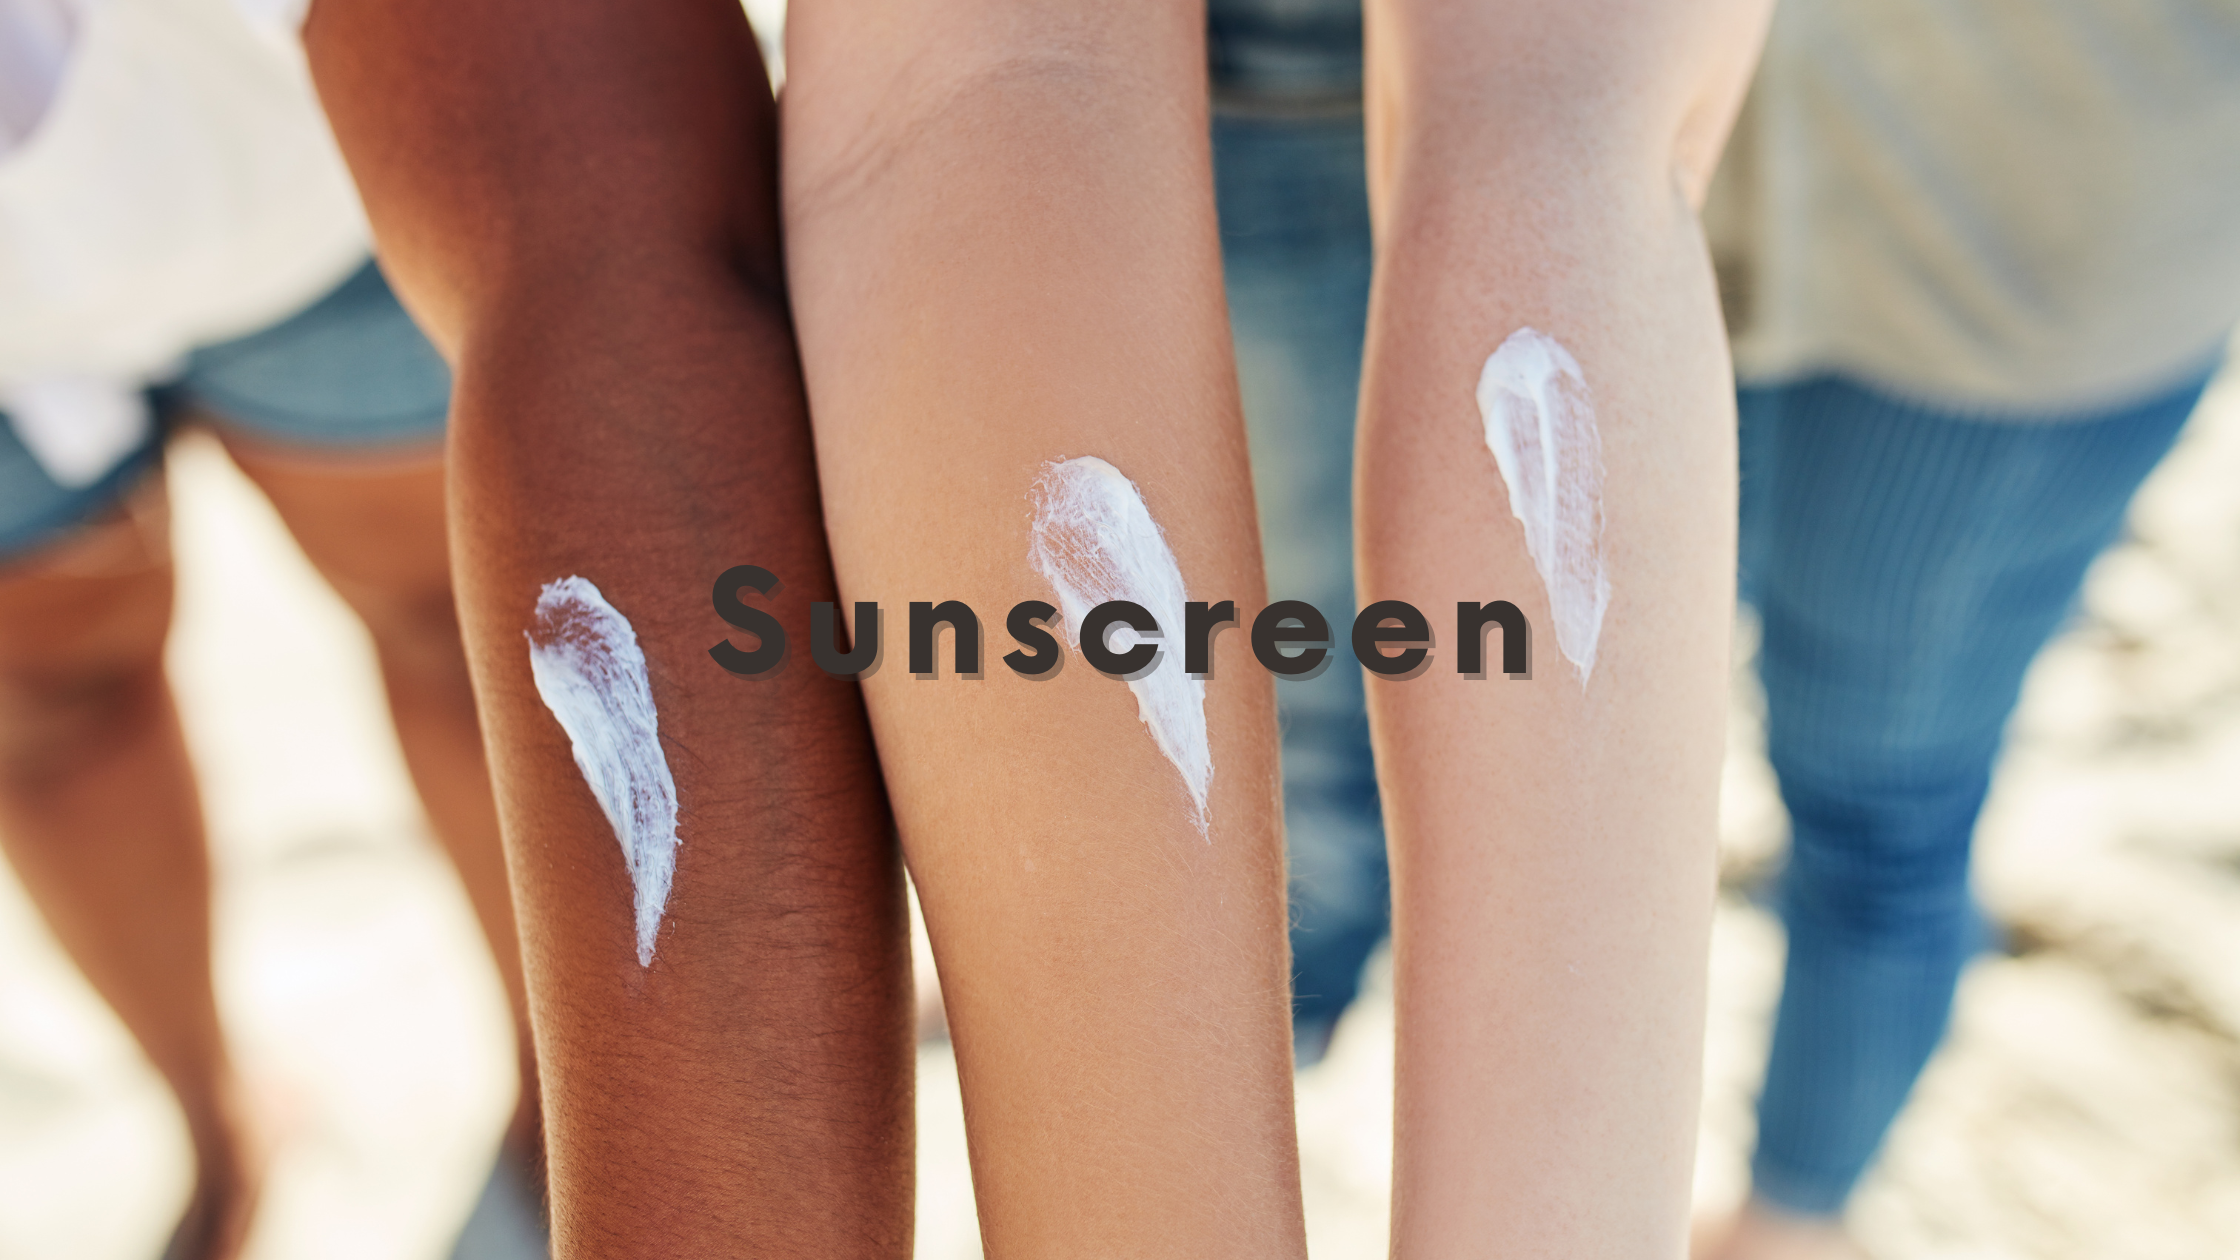 DSC Sunscreens Blog Graphic with black text "Sunscreens" centered over three arms smeared with sunscreen